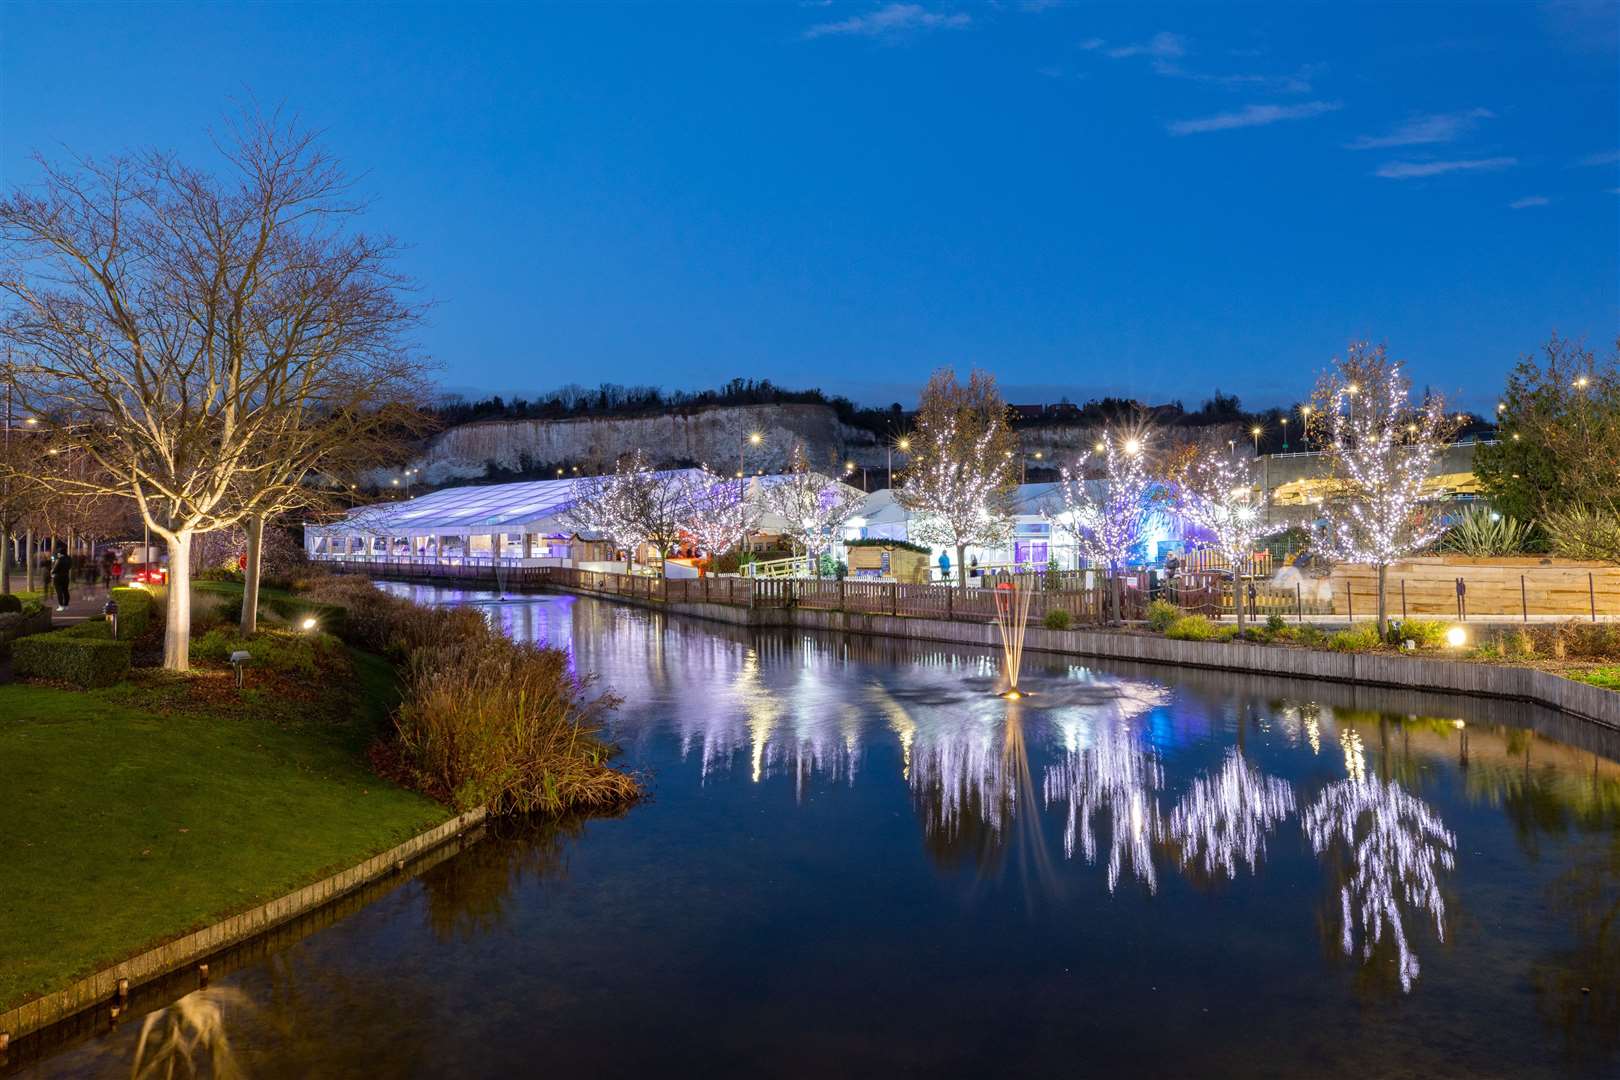 Winterland is returning to Bluewater this Christmas. Photo: Bluewater